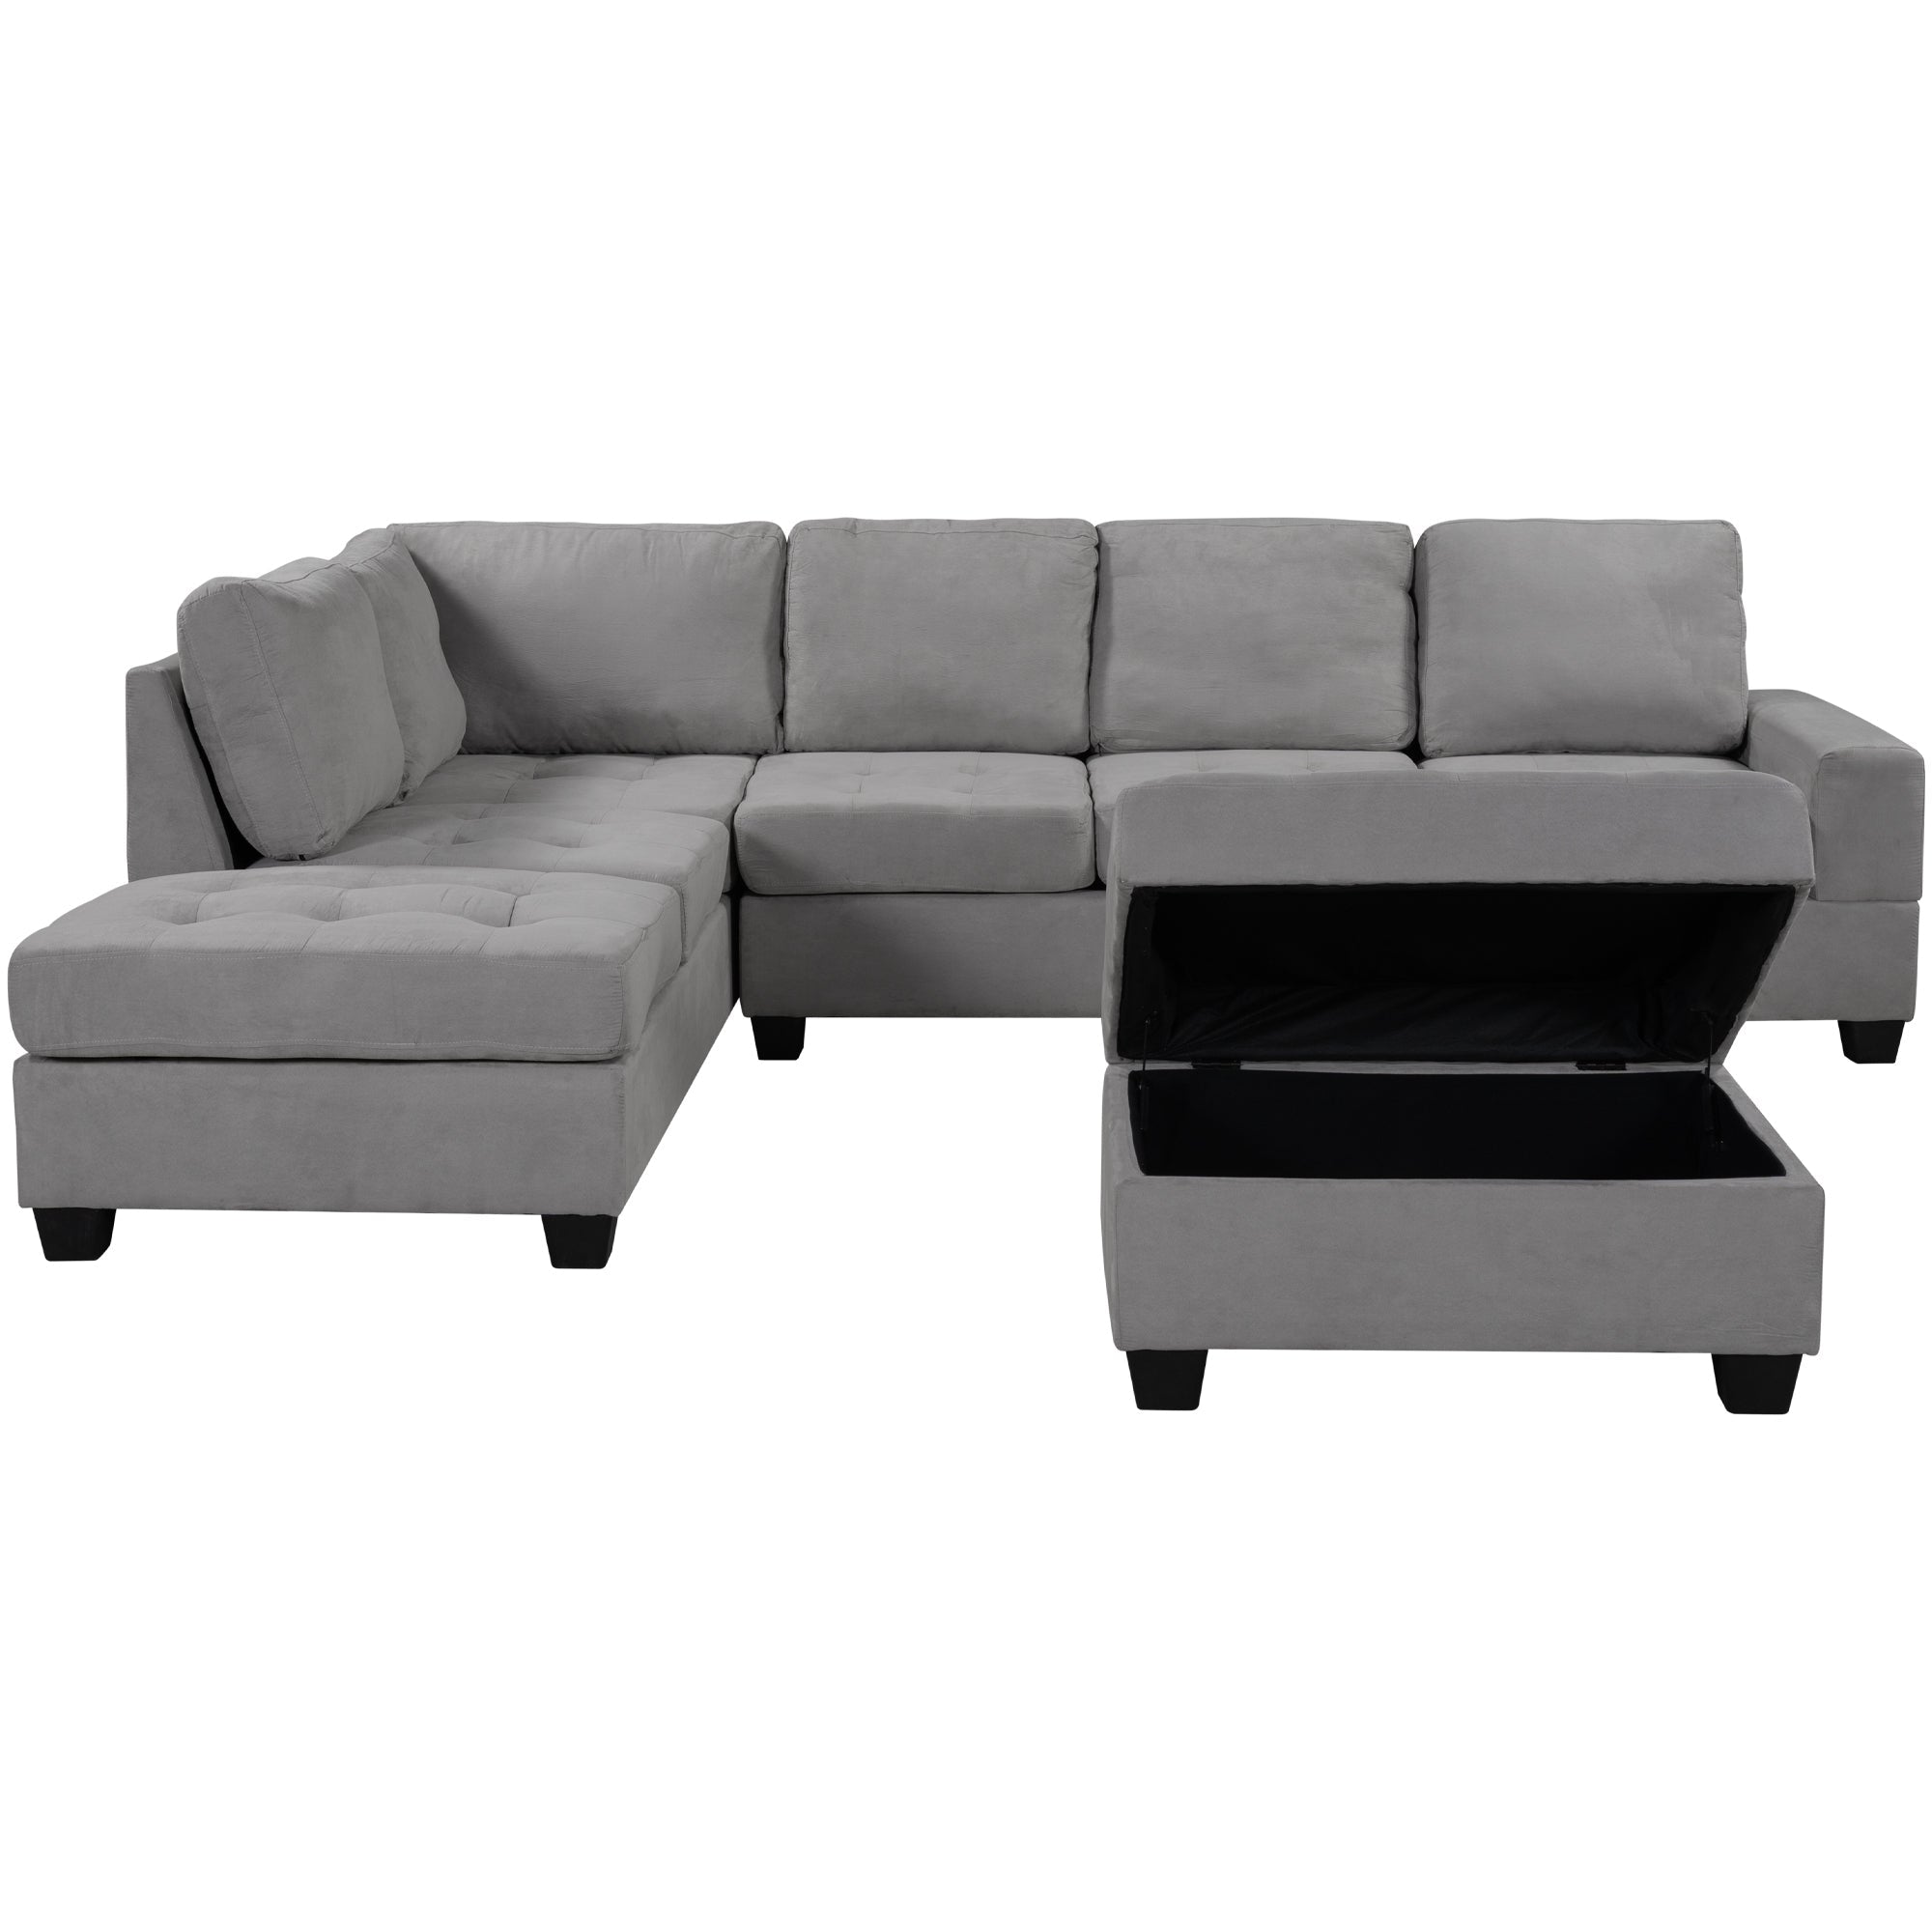 Oris fur Modern Sectional Sofa: Reversible Chaise, L-Shaped Couch Set with Storage Ottoman, Two Cup Holders - Living Room Comfort-Stationary Sectionals-American Furniture Outlet